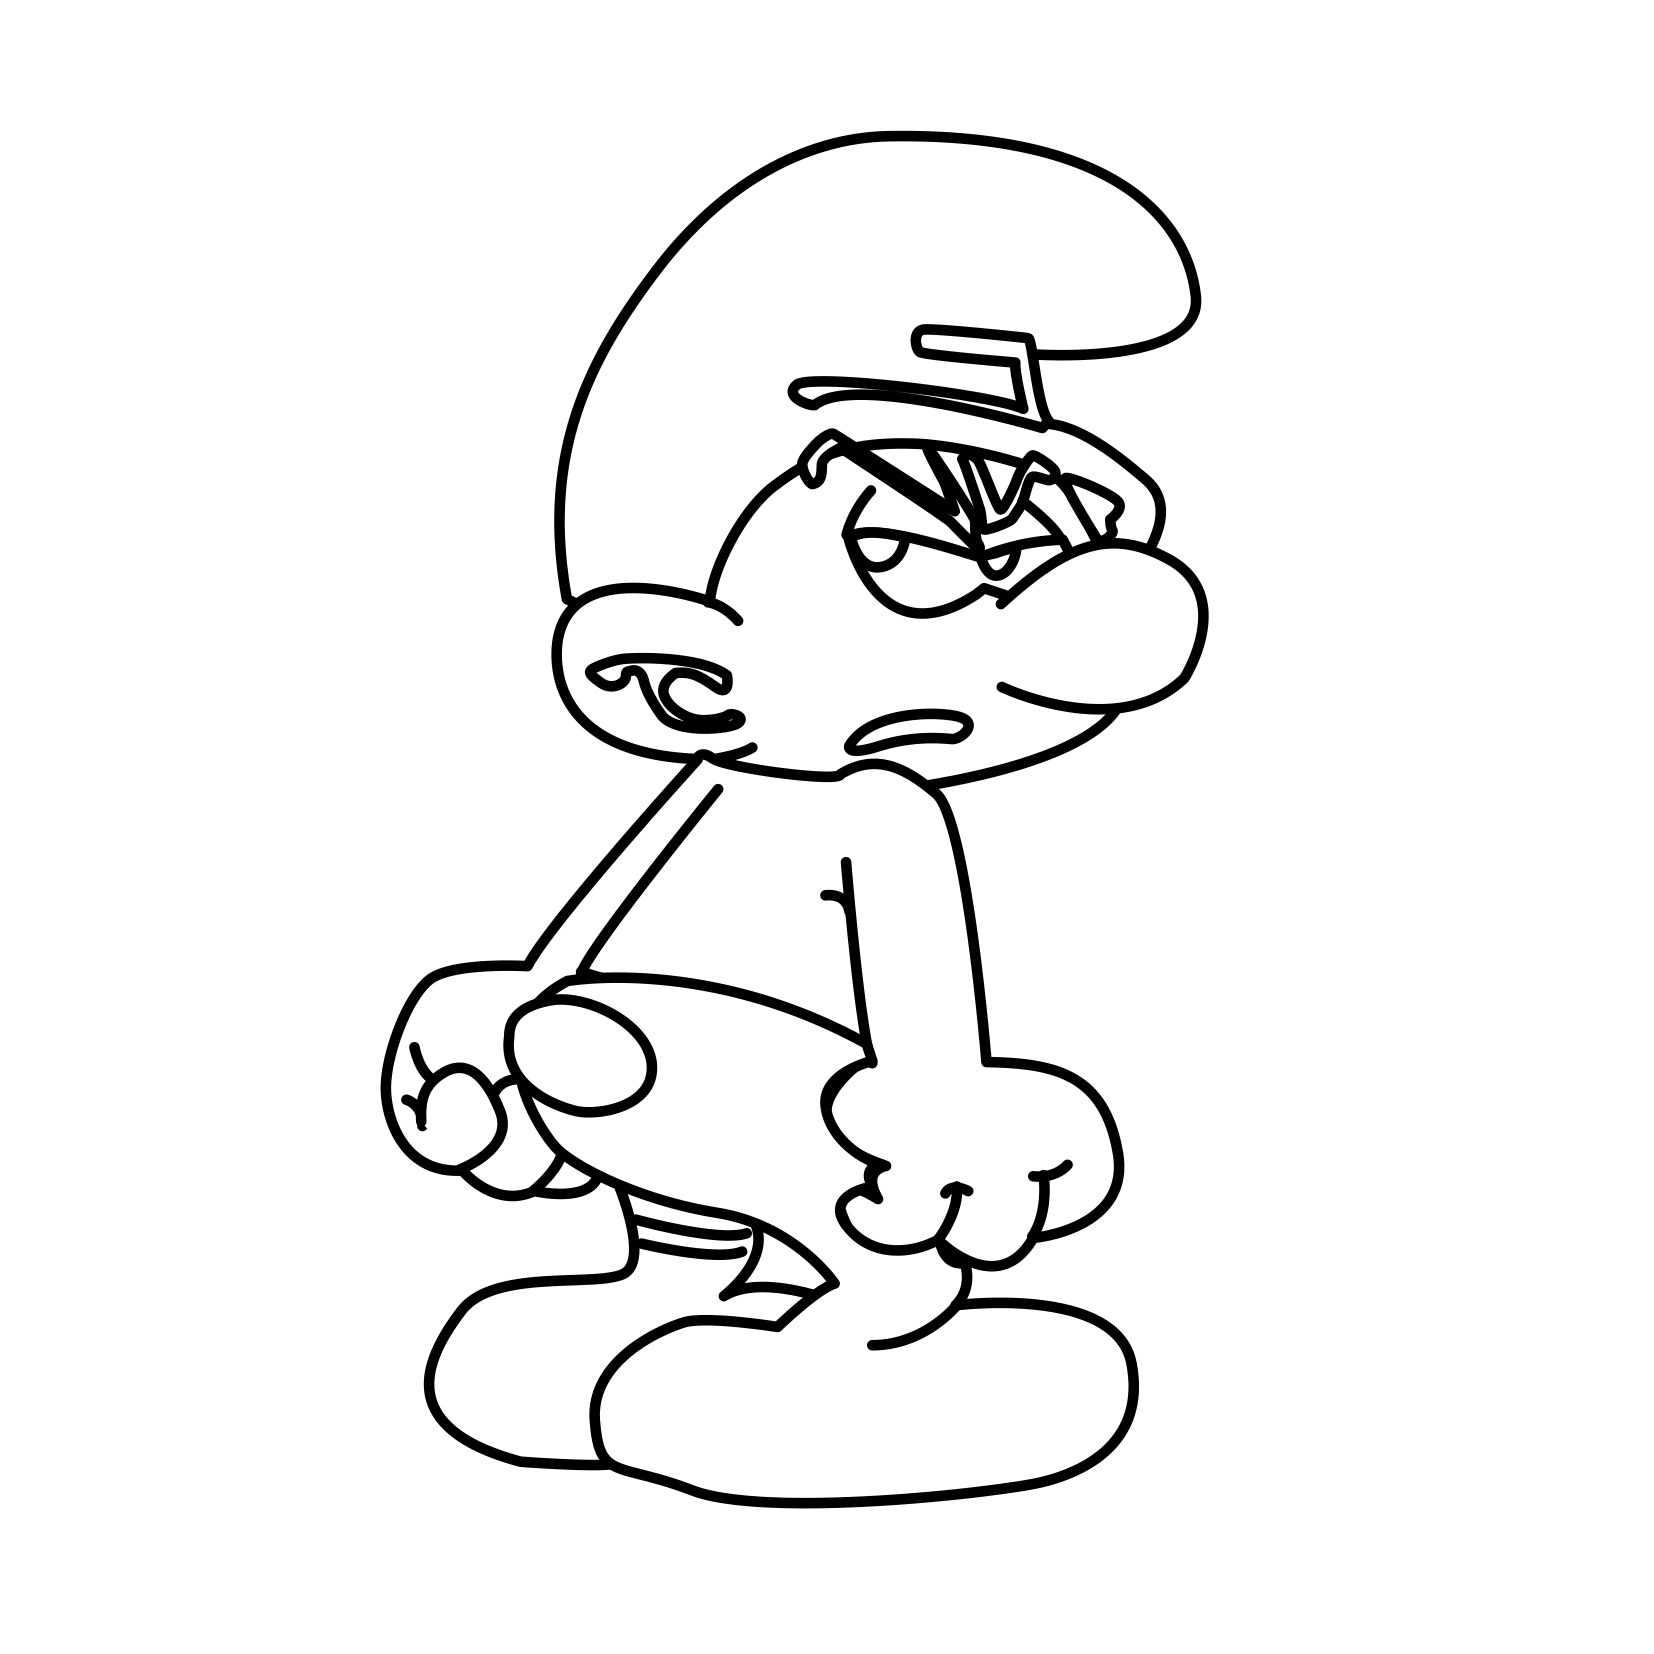 smurf coloring pages